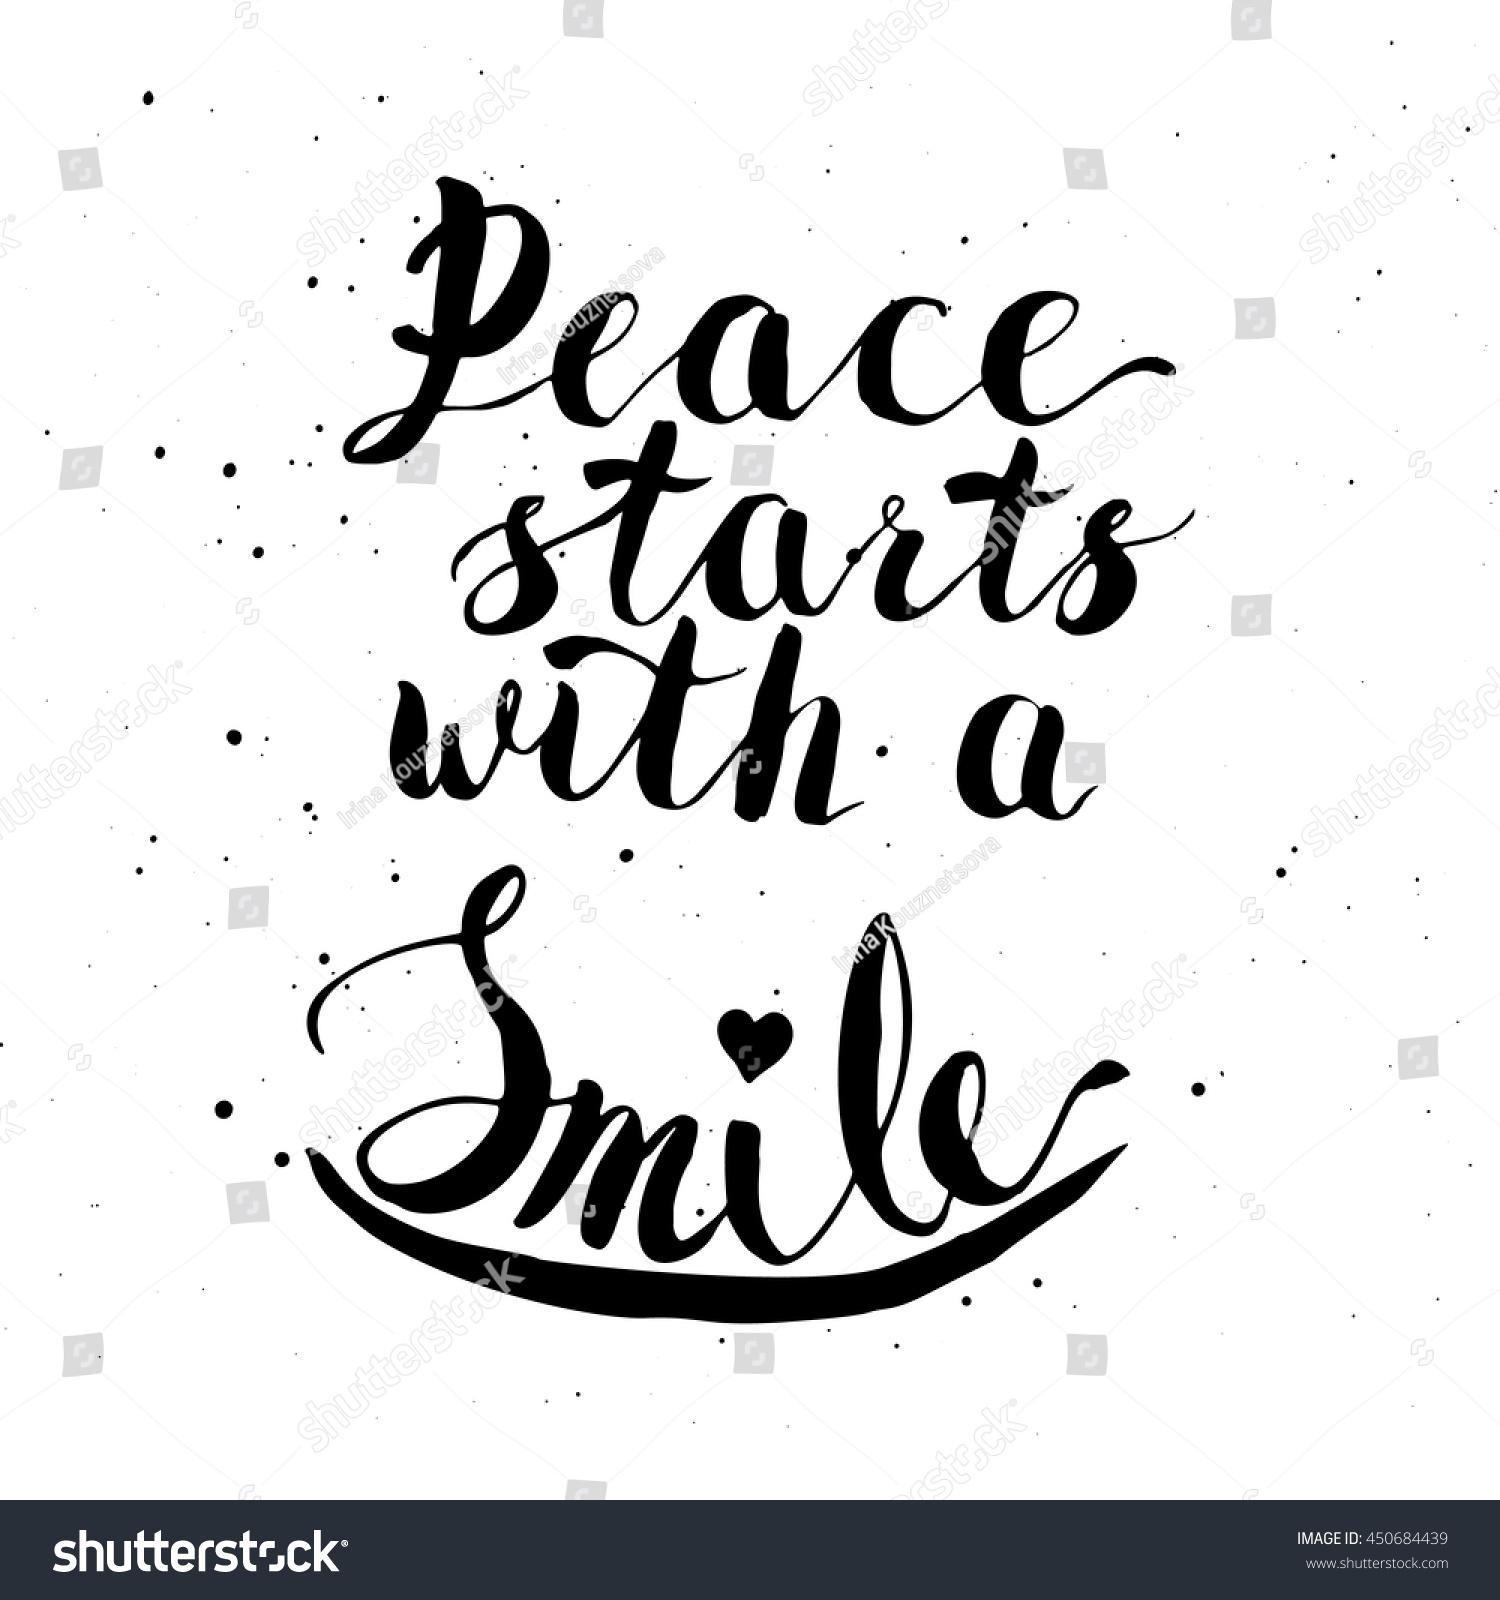 Download Peace Starts Smile Mother Teresas Quote Stock Vector ...